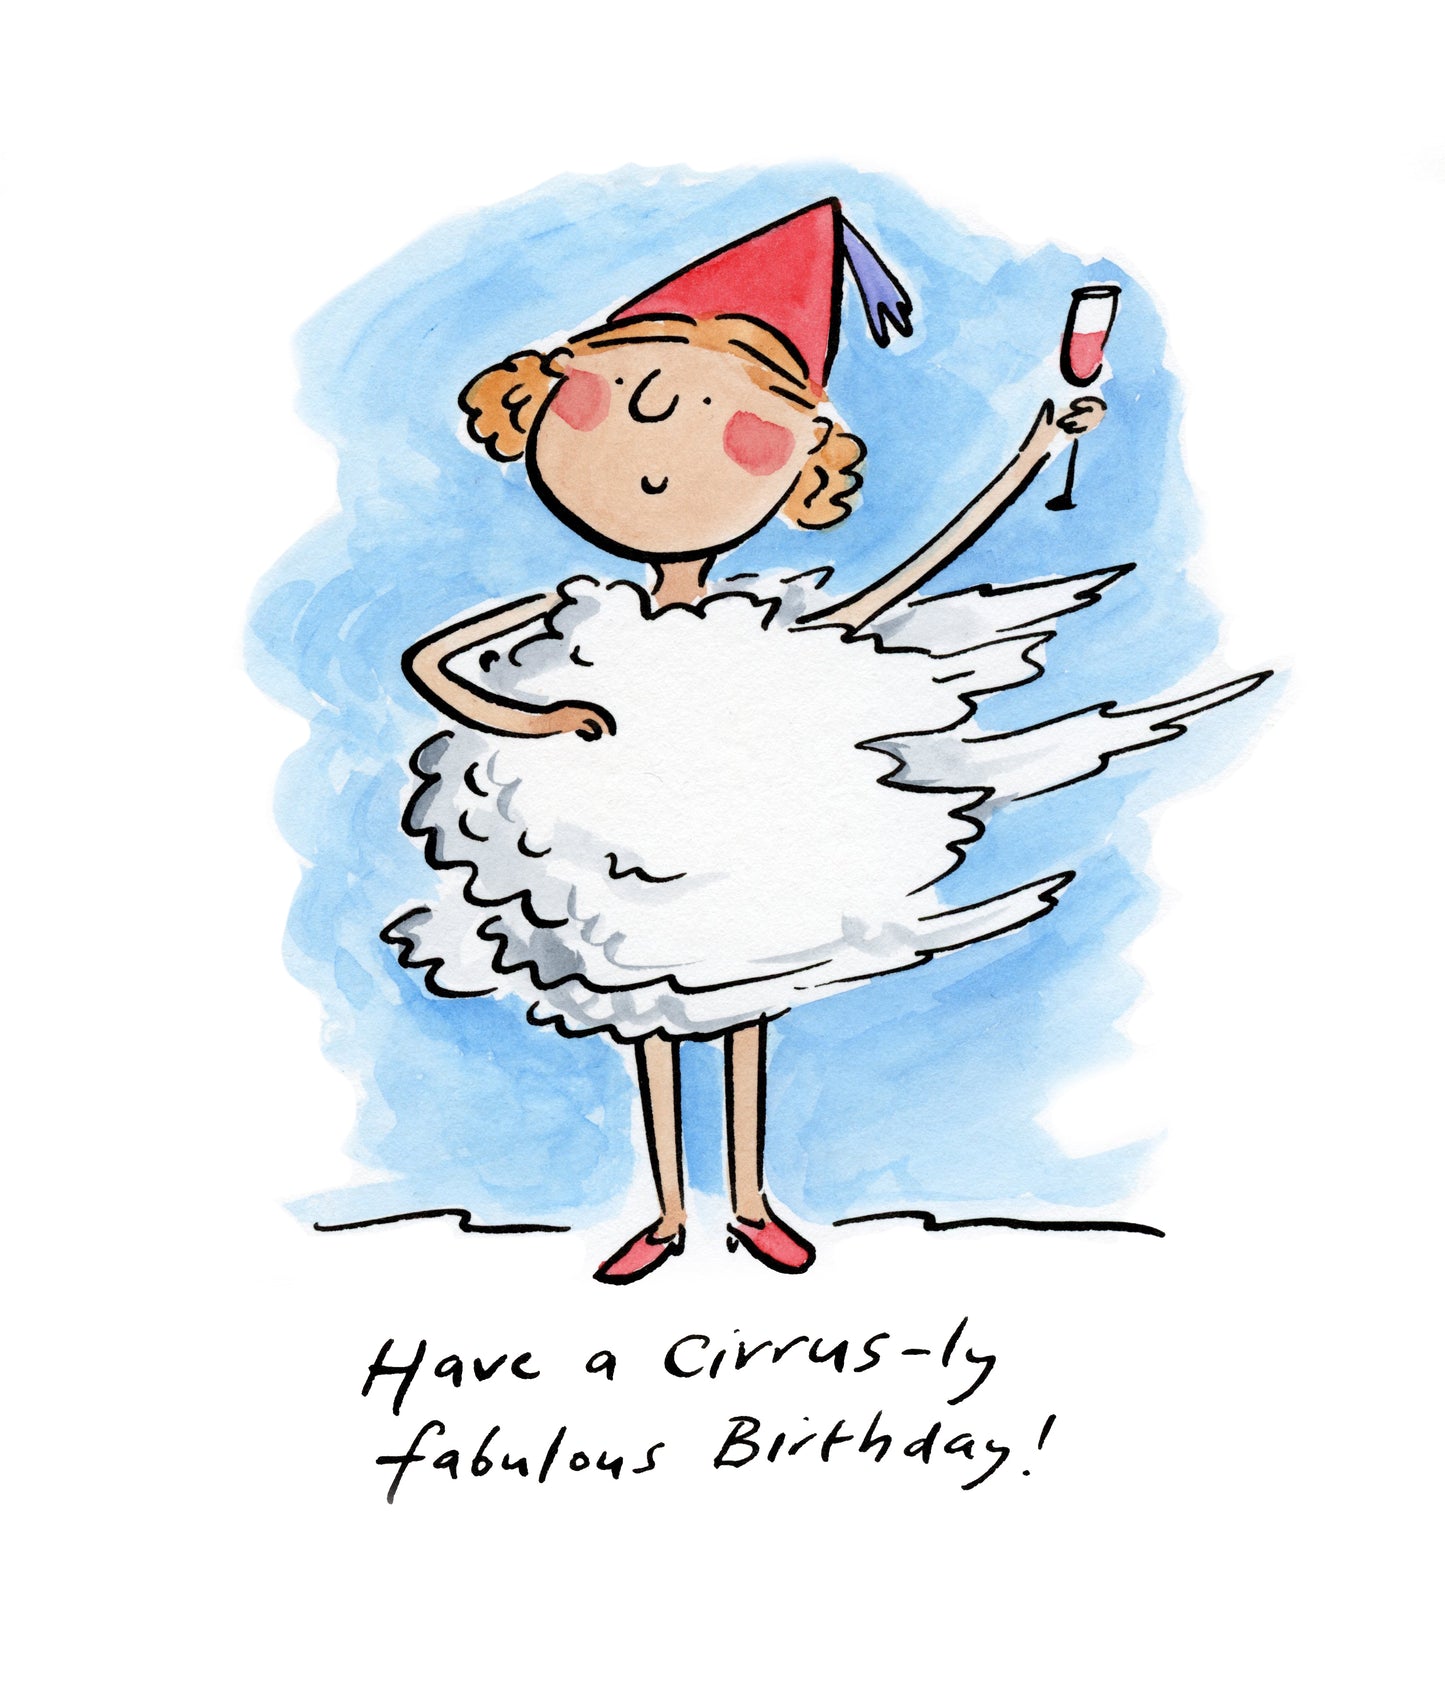 Cirrusly happy birthday original pen and ink and watercolour illustration by Rosie Brooks